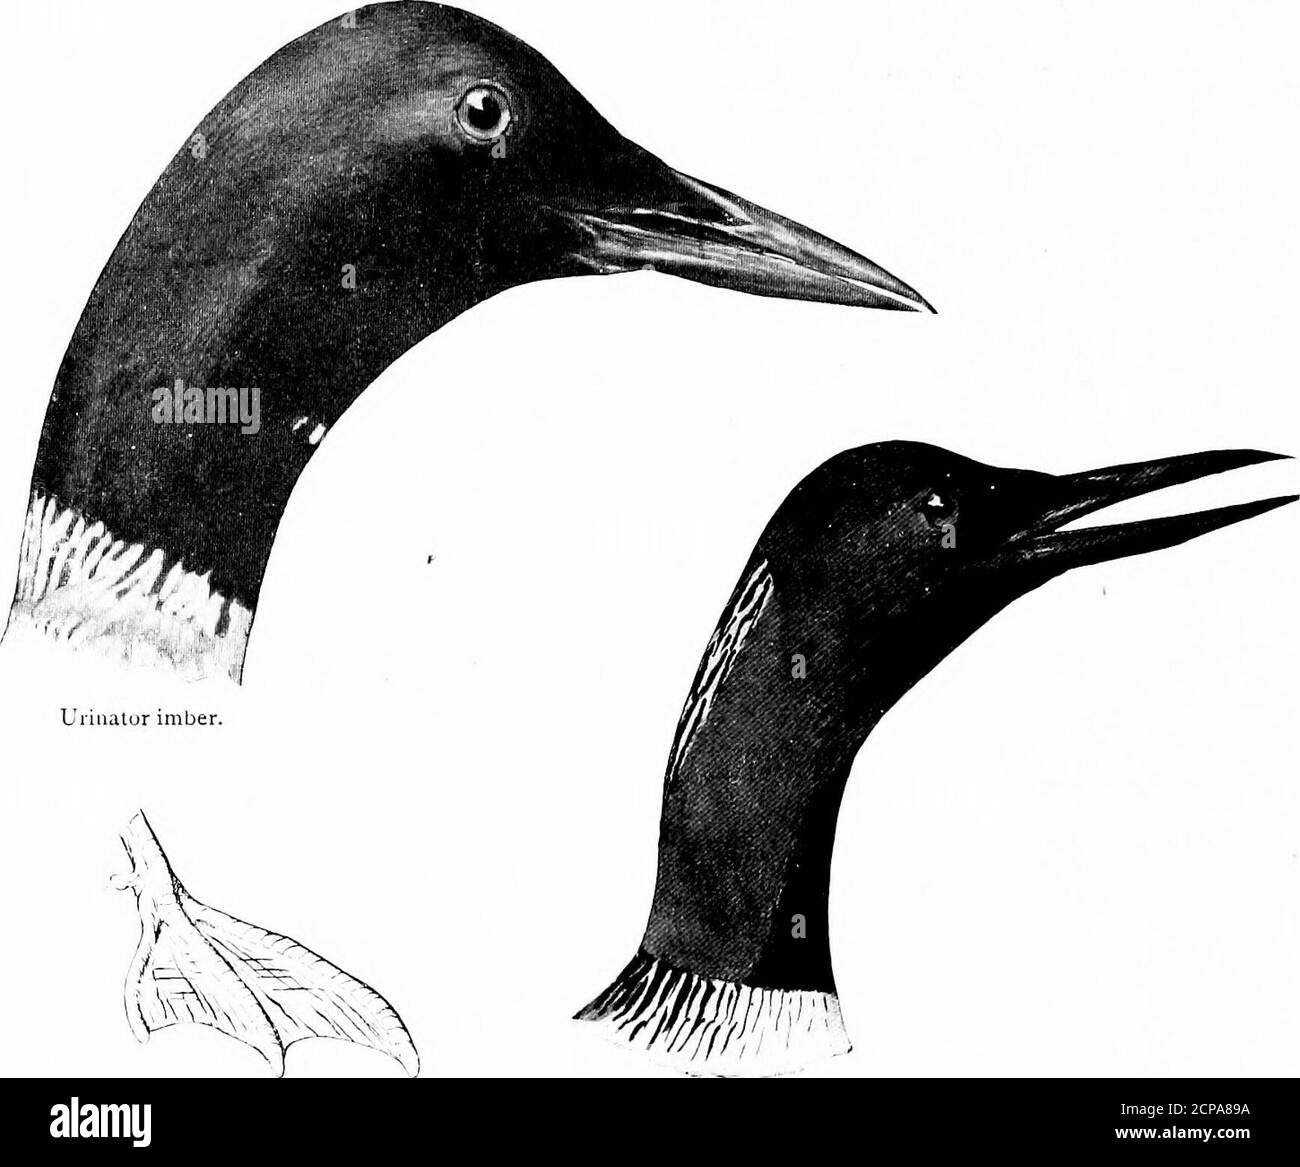 . Hunting and fishing in Florida, including a key to the water birds known to occur in the state . Colymbus auritus. Podilymbus podiceps. PoclilyinbLis podiceps. Length, 13.40; Wing, 5.40: Tarsus, 1.70; Bill, .yo. Colymbus auritus. Horned Qrebe. See page 1S5 Length, 13.50: Wing, 5; Tarsus, 1.45; Bill, .go. Podilymbus podiceps. Pied=billed Qrebe. See page rXd 142 KEY TO THE AVATER BIRDS OF FLORIDA. Family URINATORID^E, Loons — Divkrs.. Tiiii.iliir iniber ( foot). Uiinntor liimme. Length, 31; Wing, 14; Tarsus, 3.35; Kill, 2,75. Length, 24; Wing, 10.75; Tarsus, 2.75 ; Kill, ; Urinator imber. Loon Stock Photo